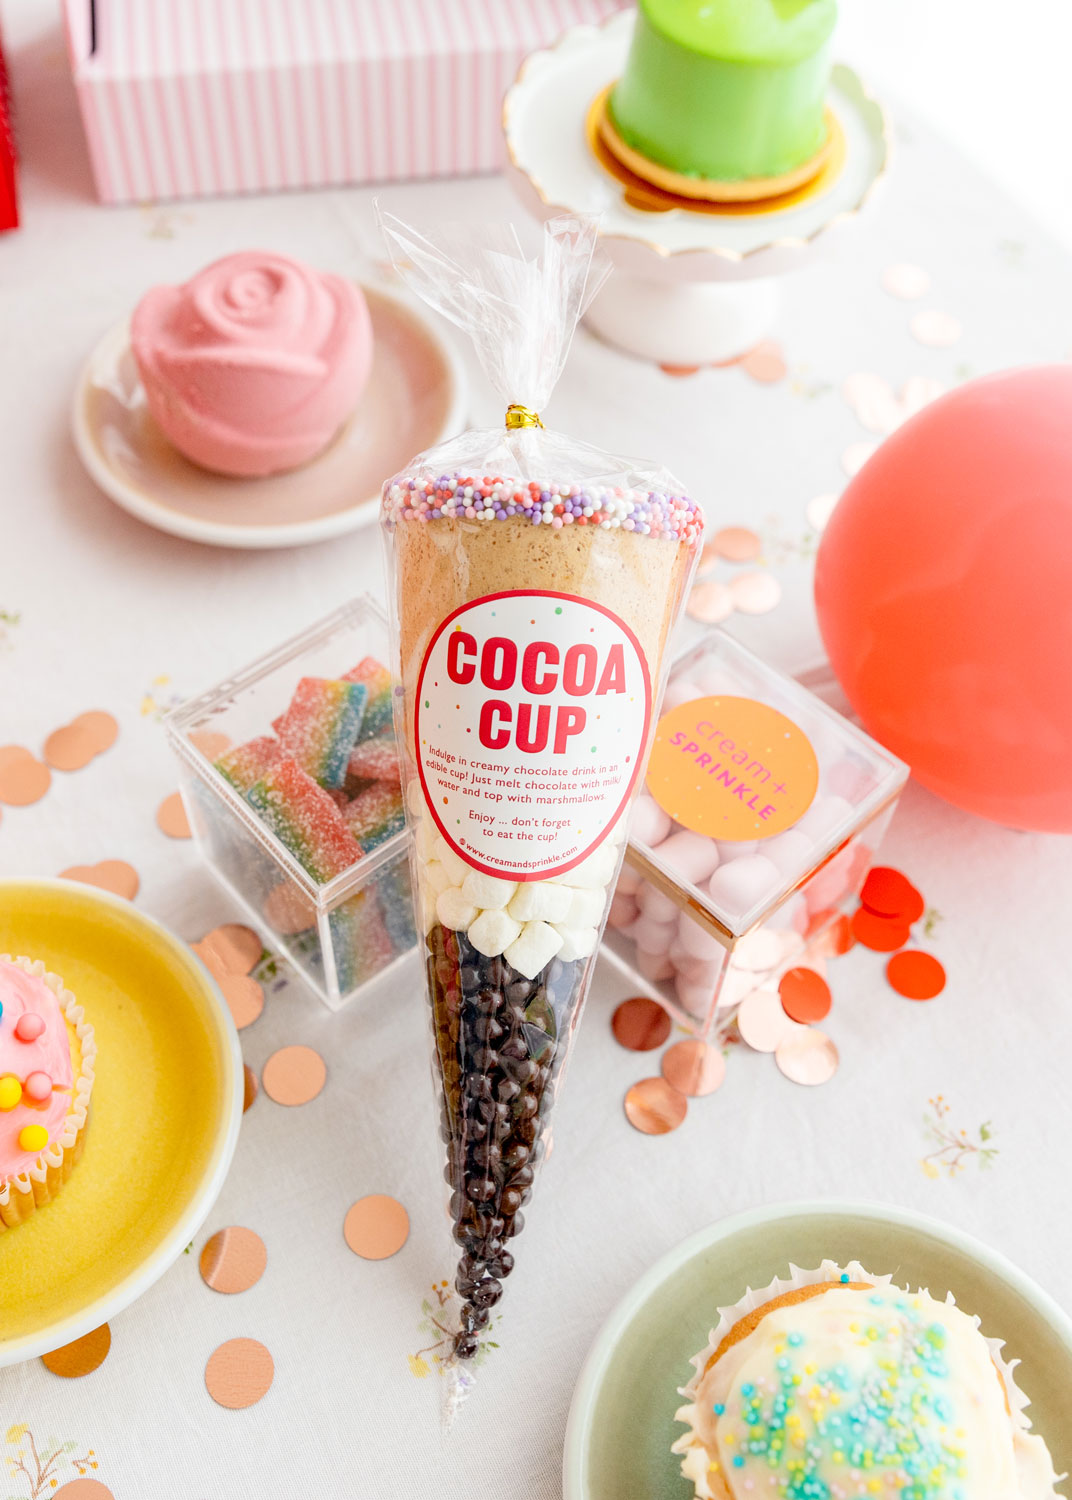 Cream and Sprinkle Cocoa Cup Unicorn - The Cone Series - Edible Cup